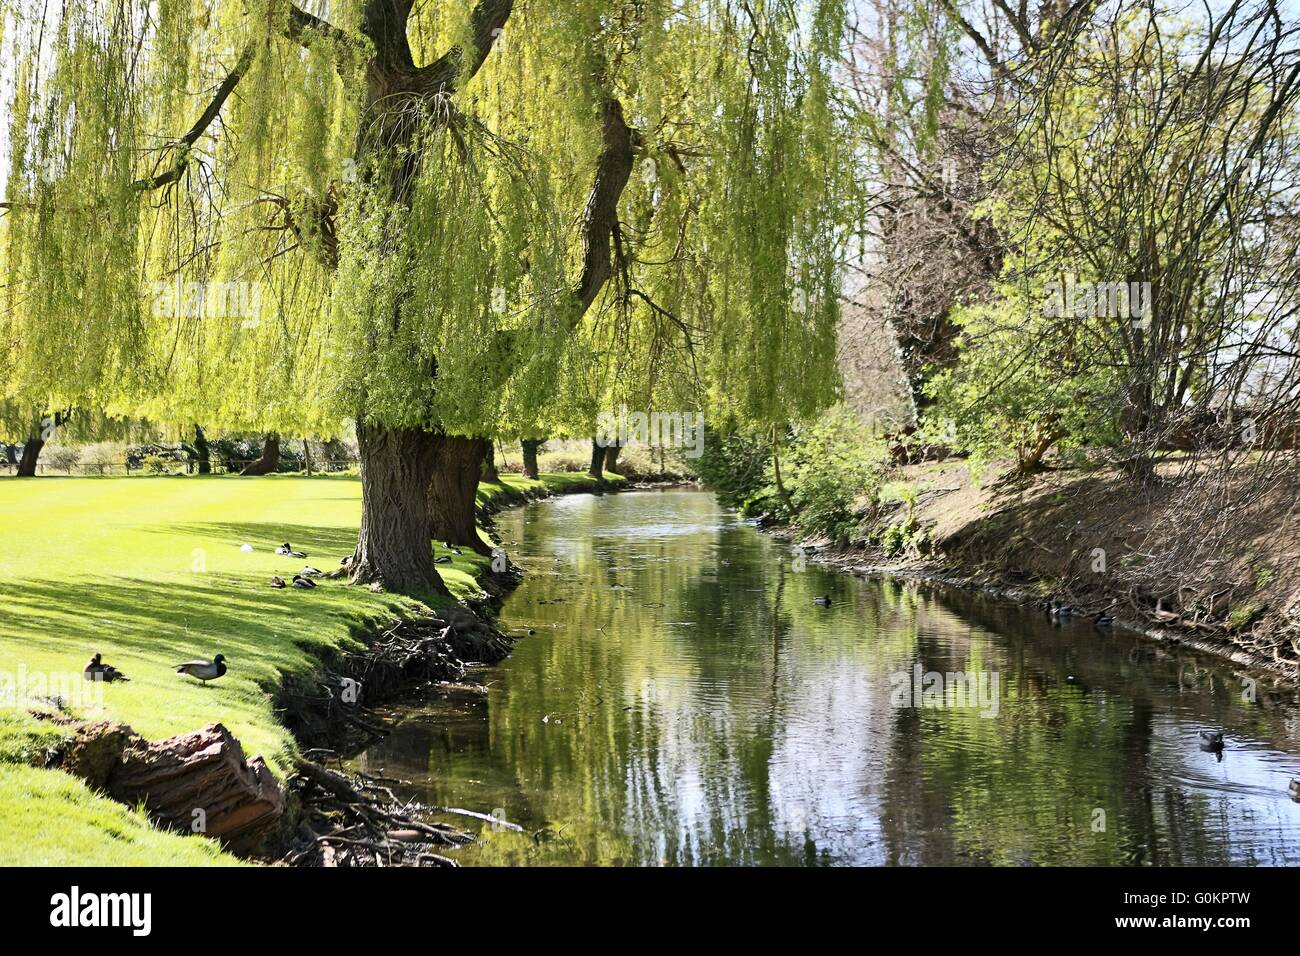 Bourne Lincolnshire UK - river - weeping willow trees Stock Photo